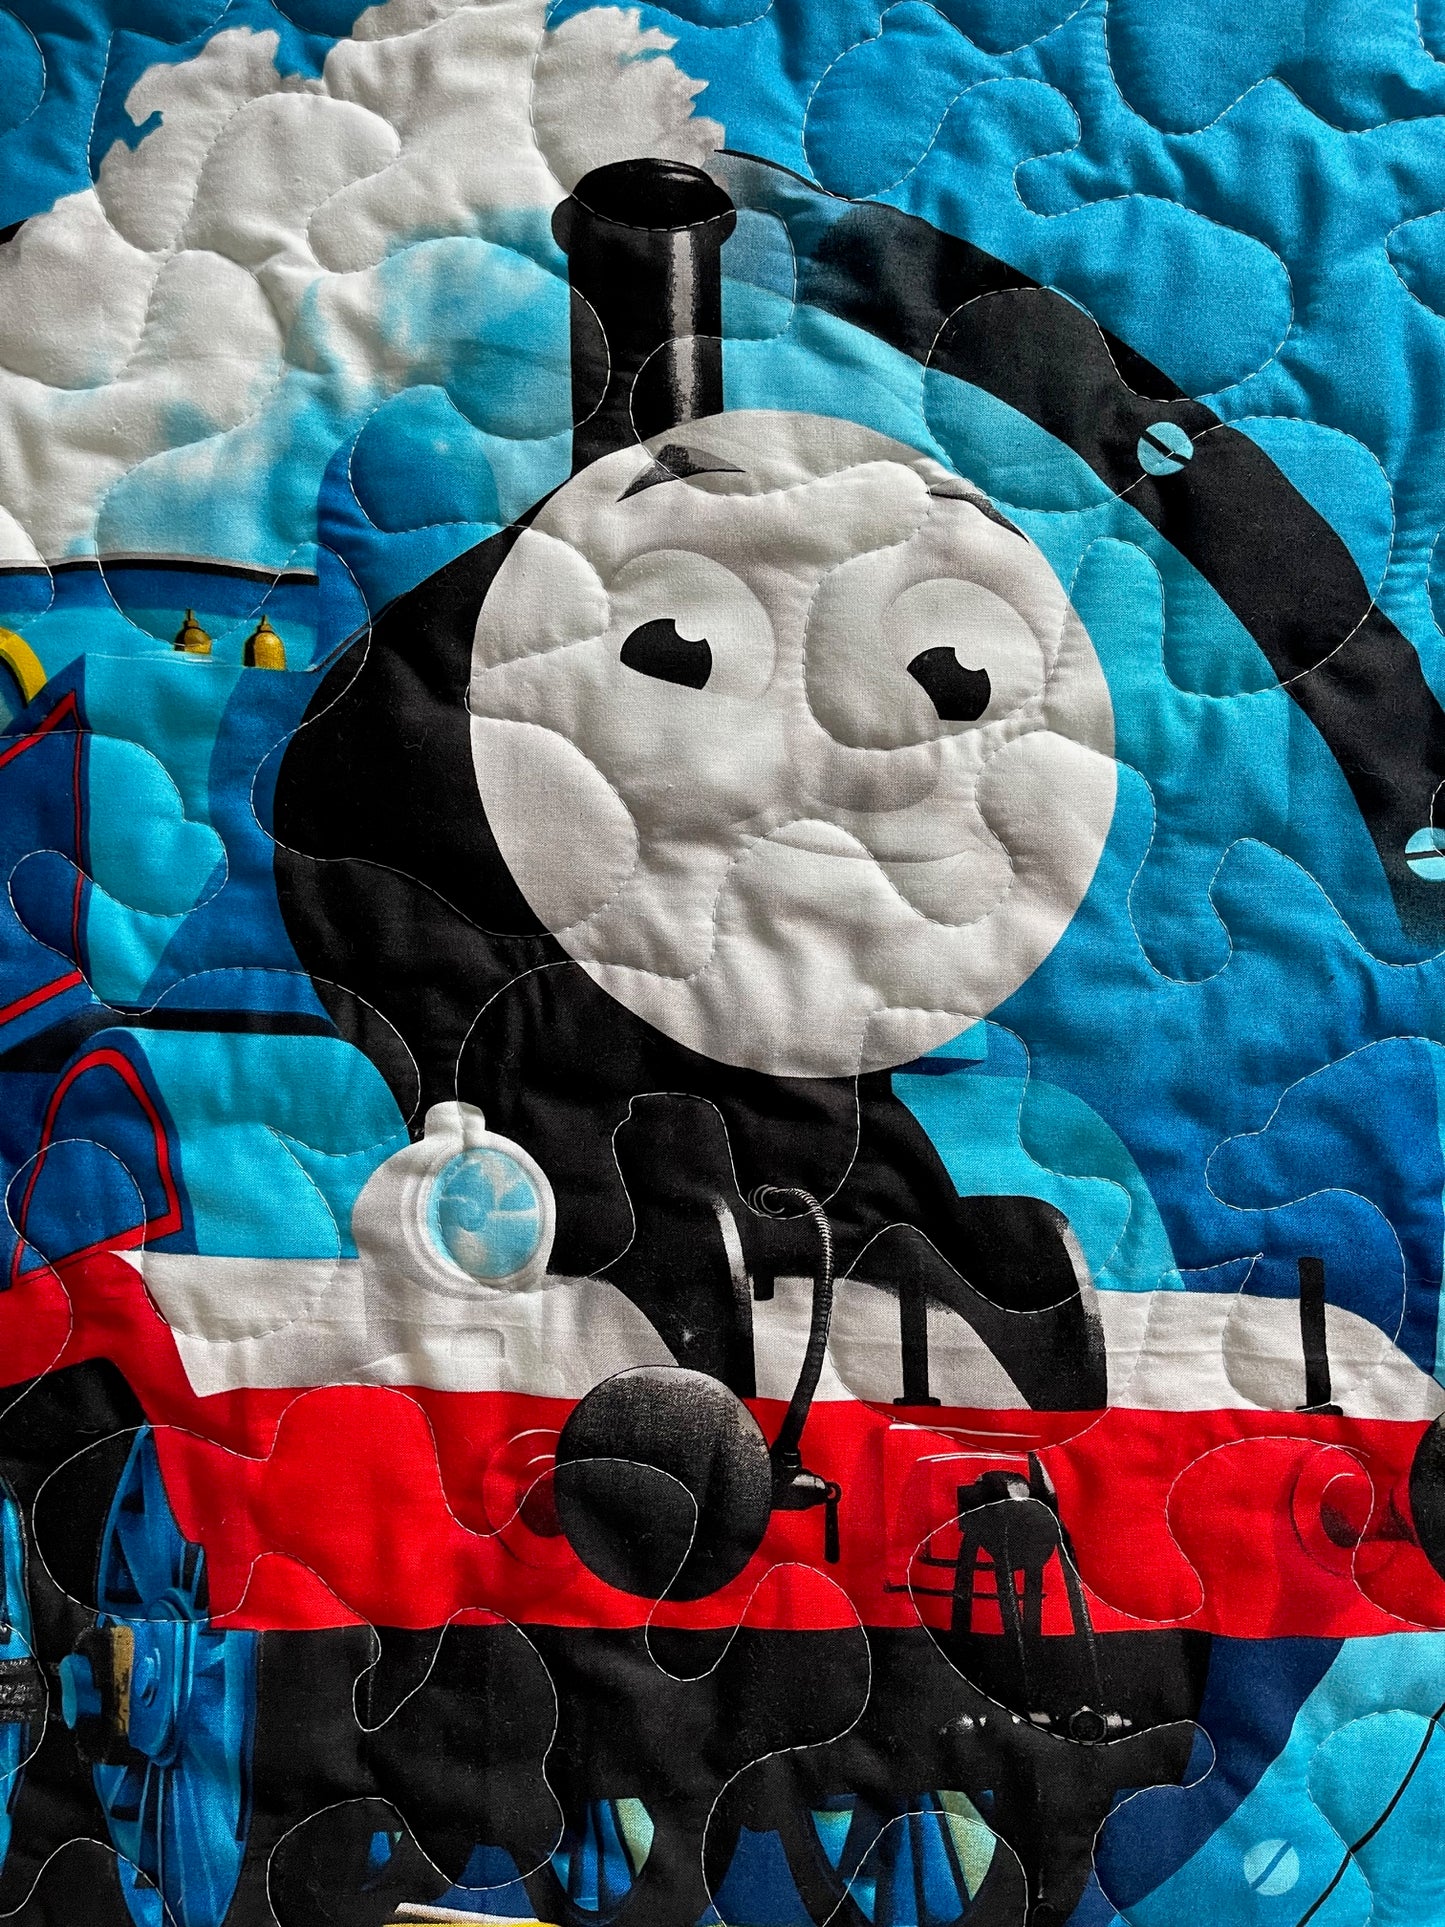 THOMAS THE TRAIN 36"X44" Lightweight Quilted Blanket